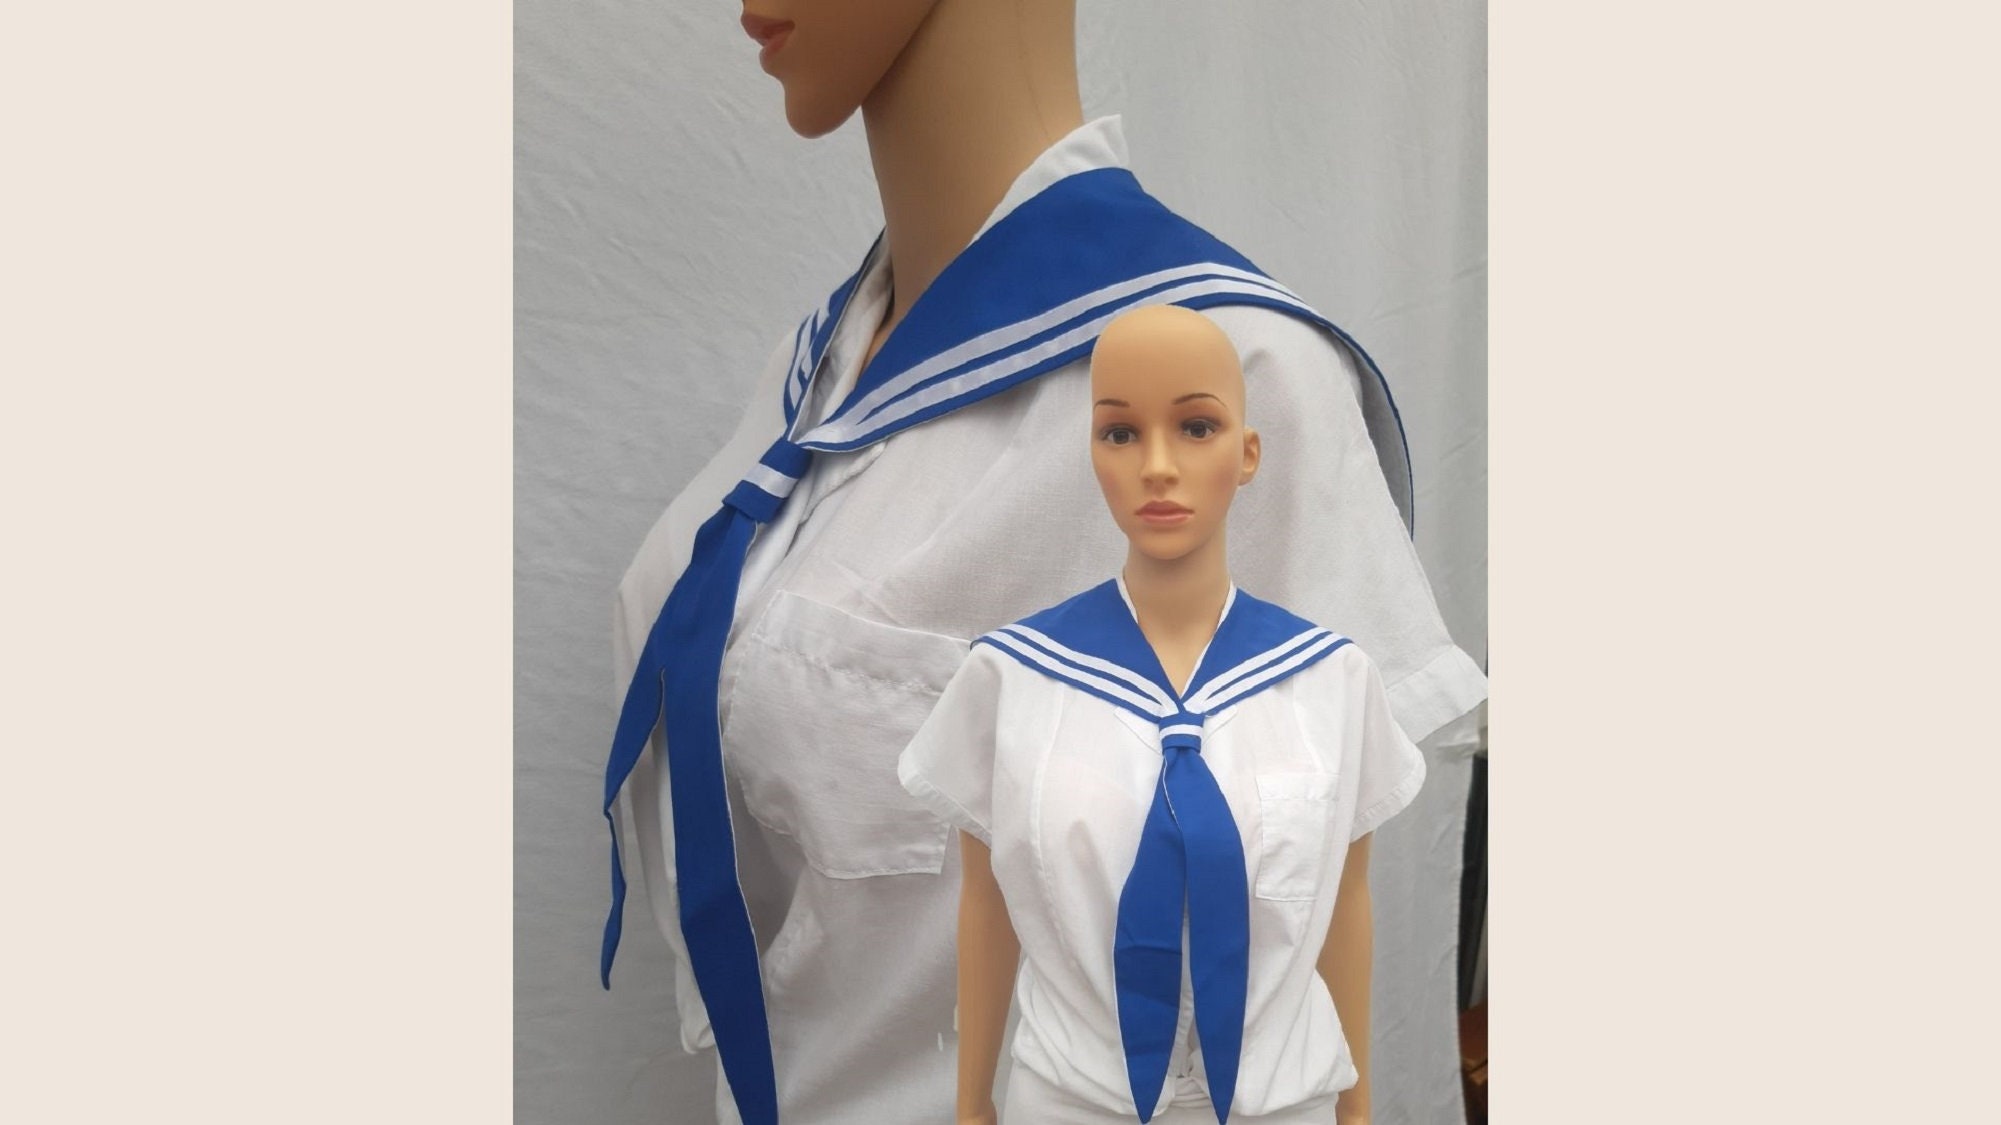 LuKris 116 Sailor outfit by FreckledJellyfish on DeviantArt